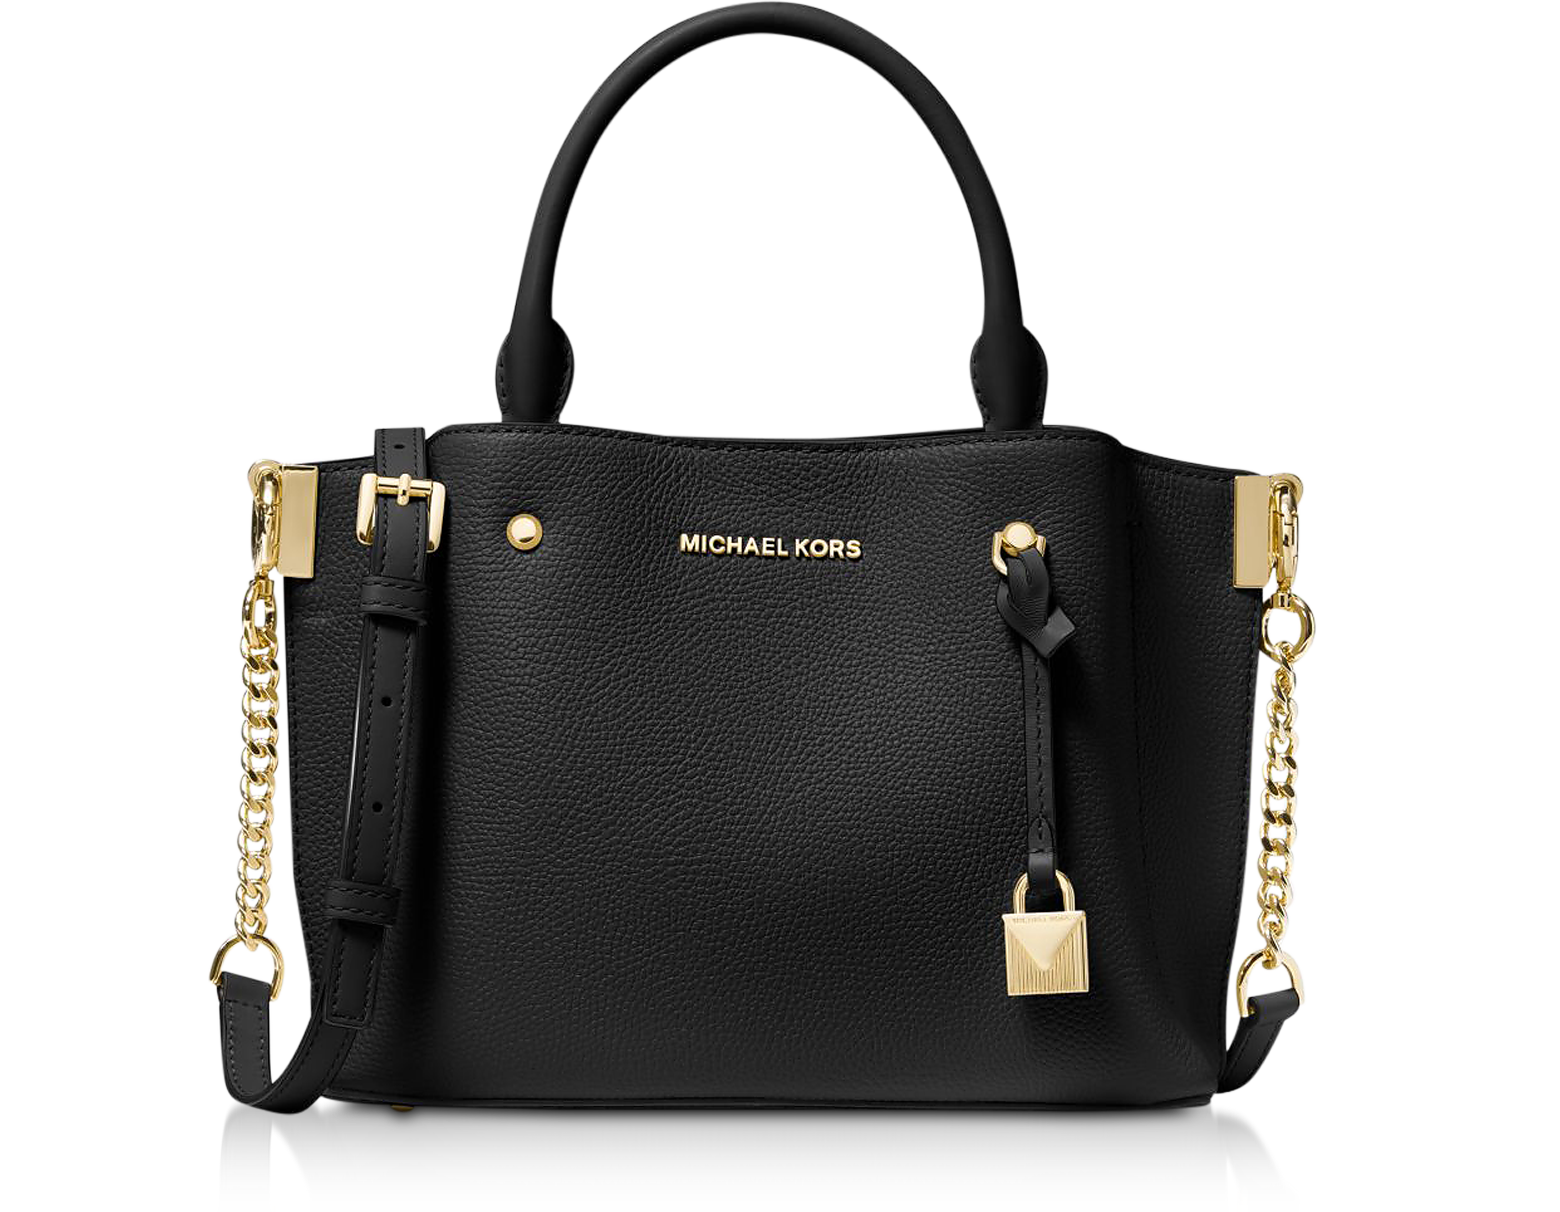 Michael Kors Black Arielle Small Pebbled Leather Satchel at FORZIERI